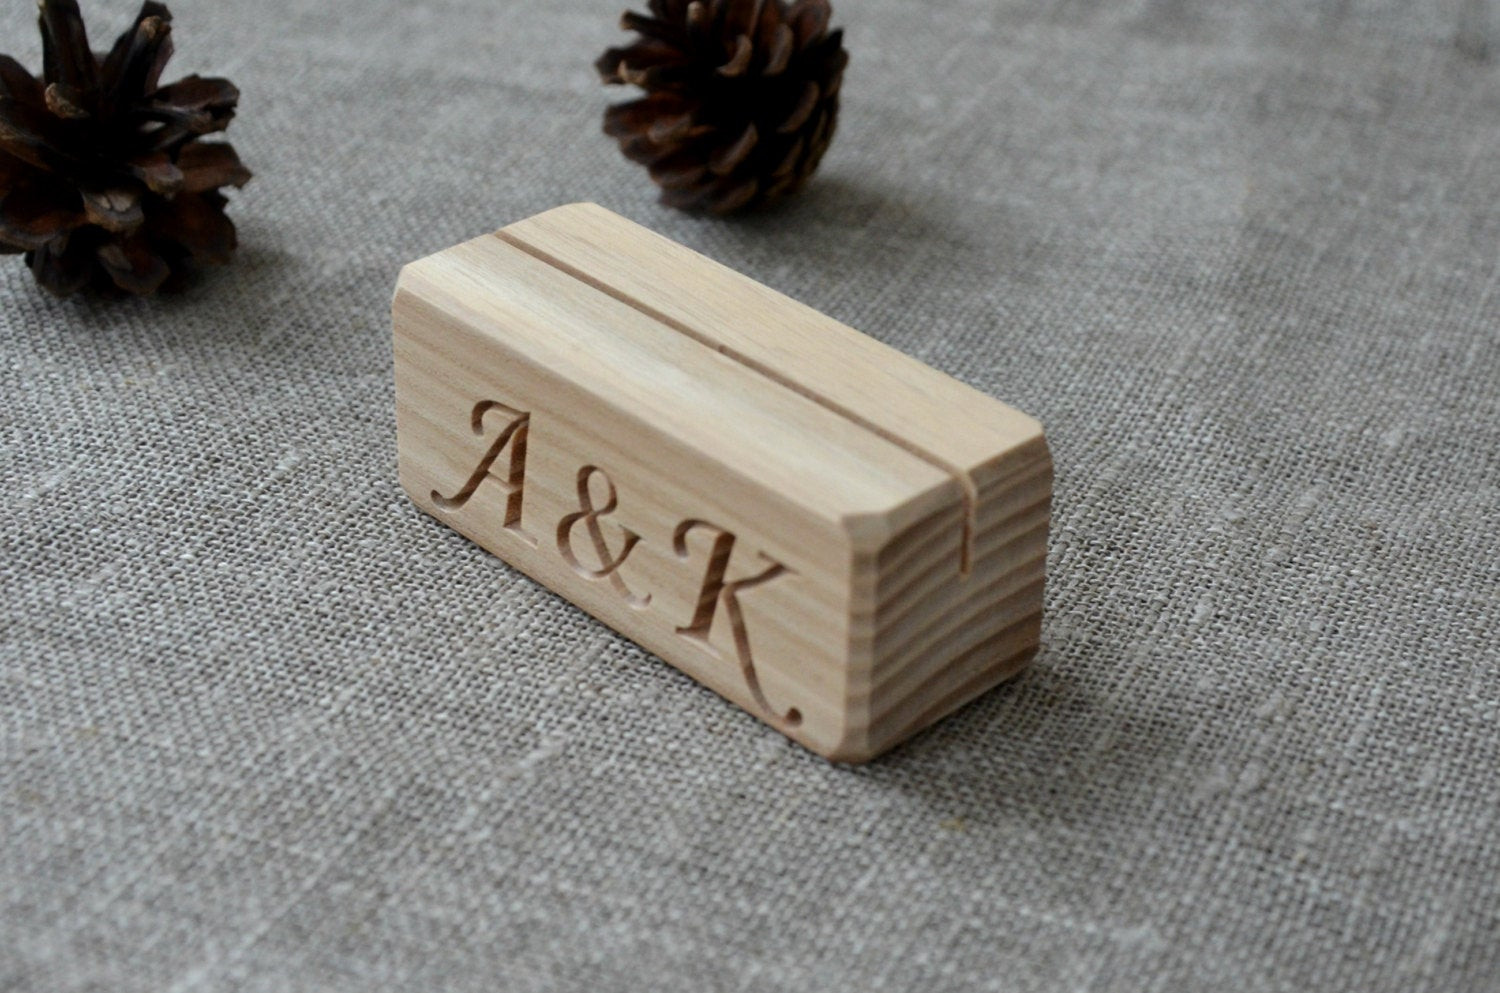 DIY Wedding Place Card Holder
 10 Personalized Wood Place Card Holders for Weddings DIY